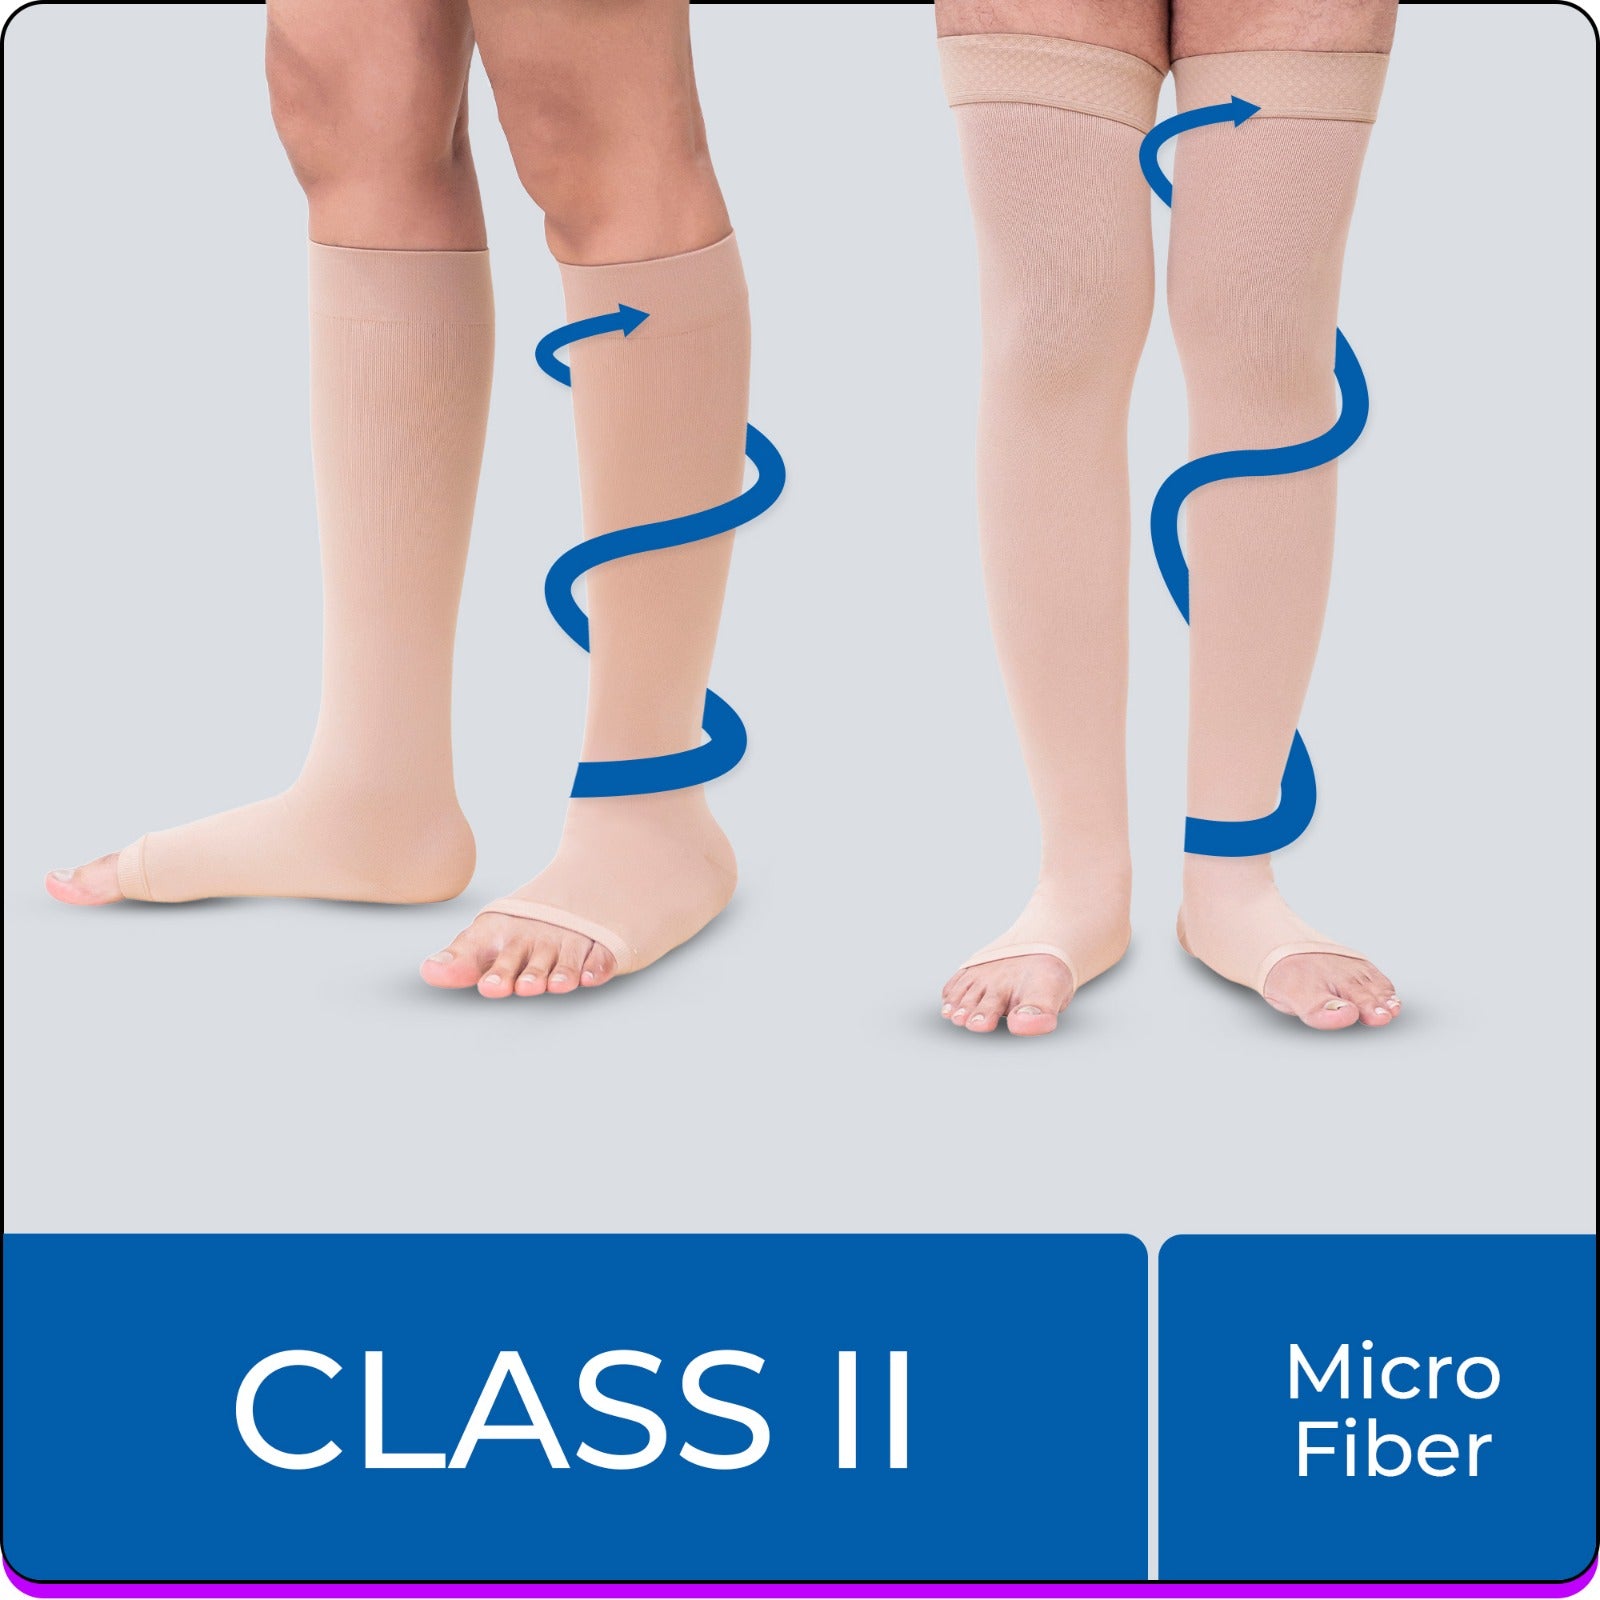 India's Best Varicose Veins Compression Stockings, Sorgen Royale Class II, Sorgen Sockings